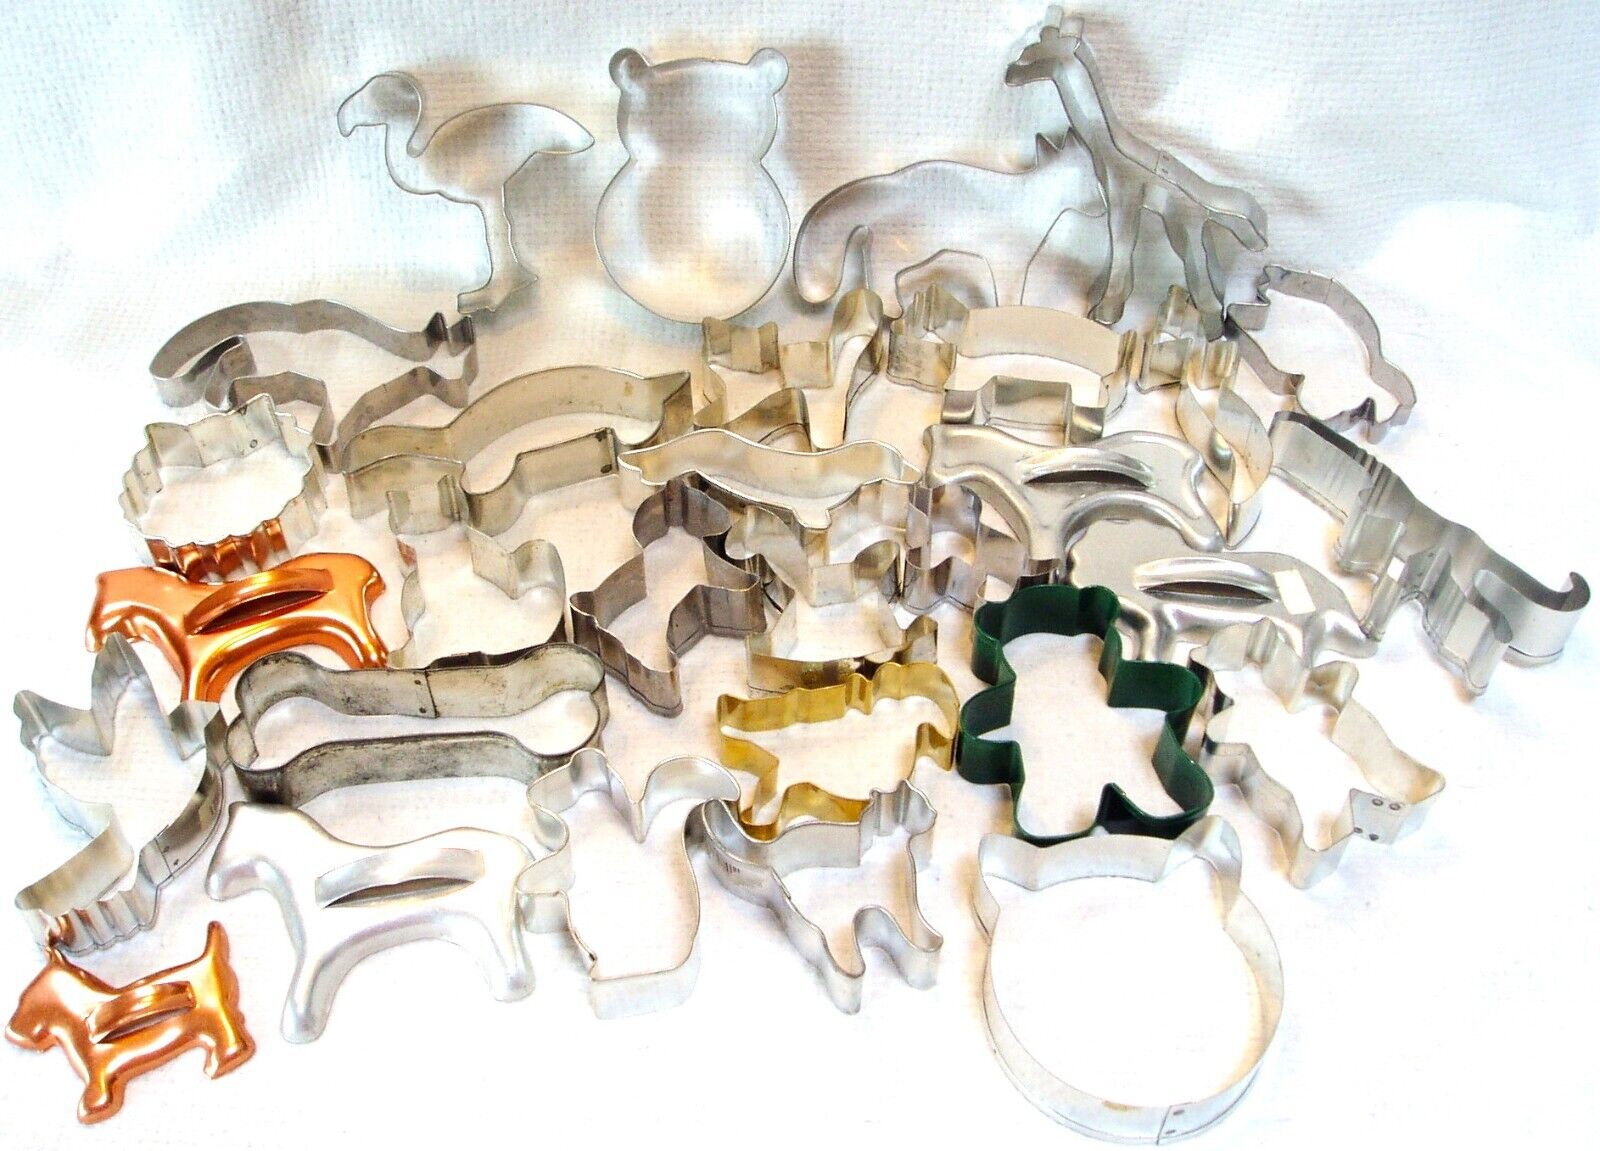 NWOT Lot of 30 LARGE & SMALL ANIMAL THEMED METAL COOKIE CUTTERS fox bear giraffe